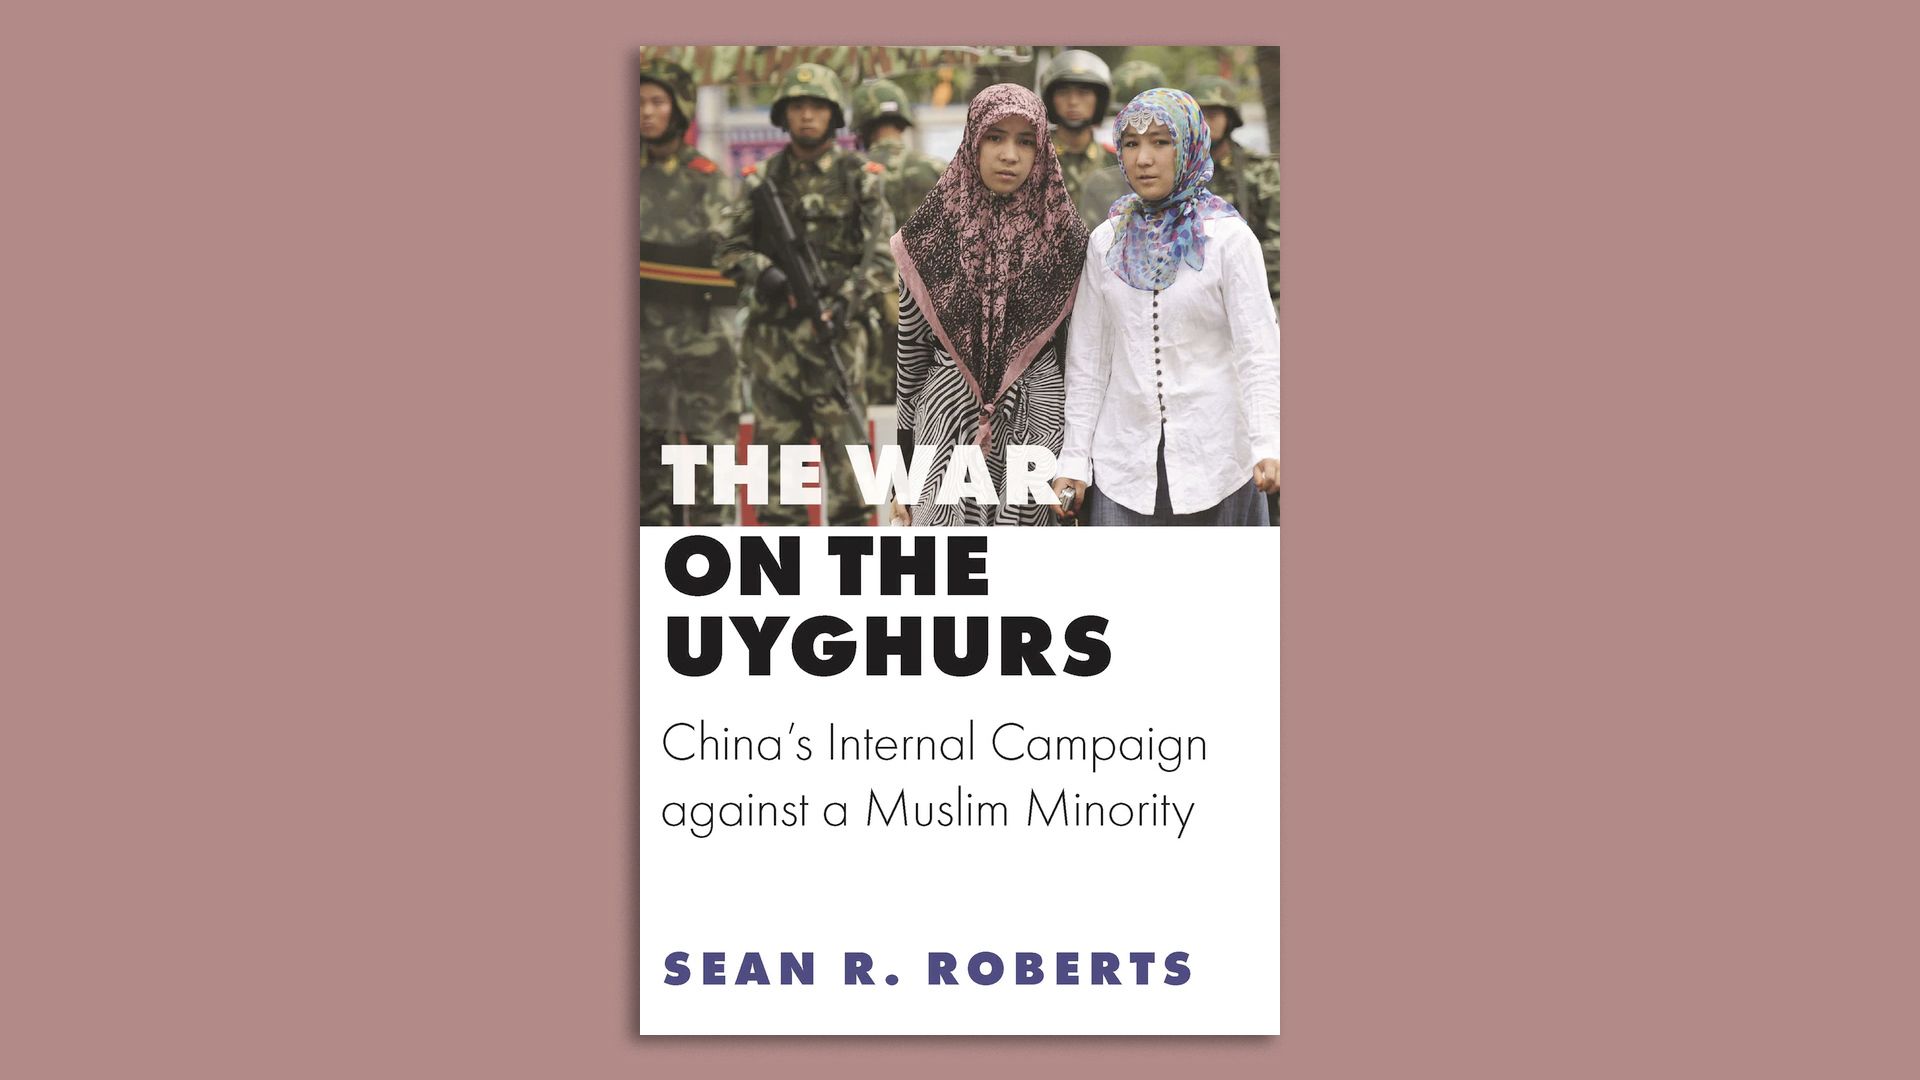 The cover of the book The War on the Uyghurs by Sean Roberts.